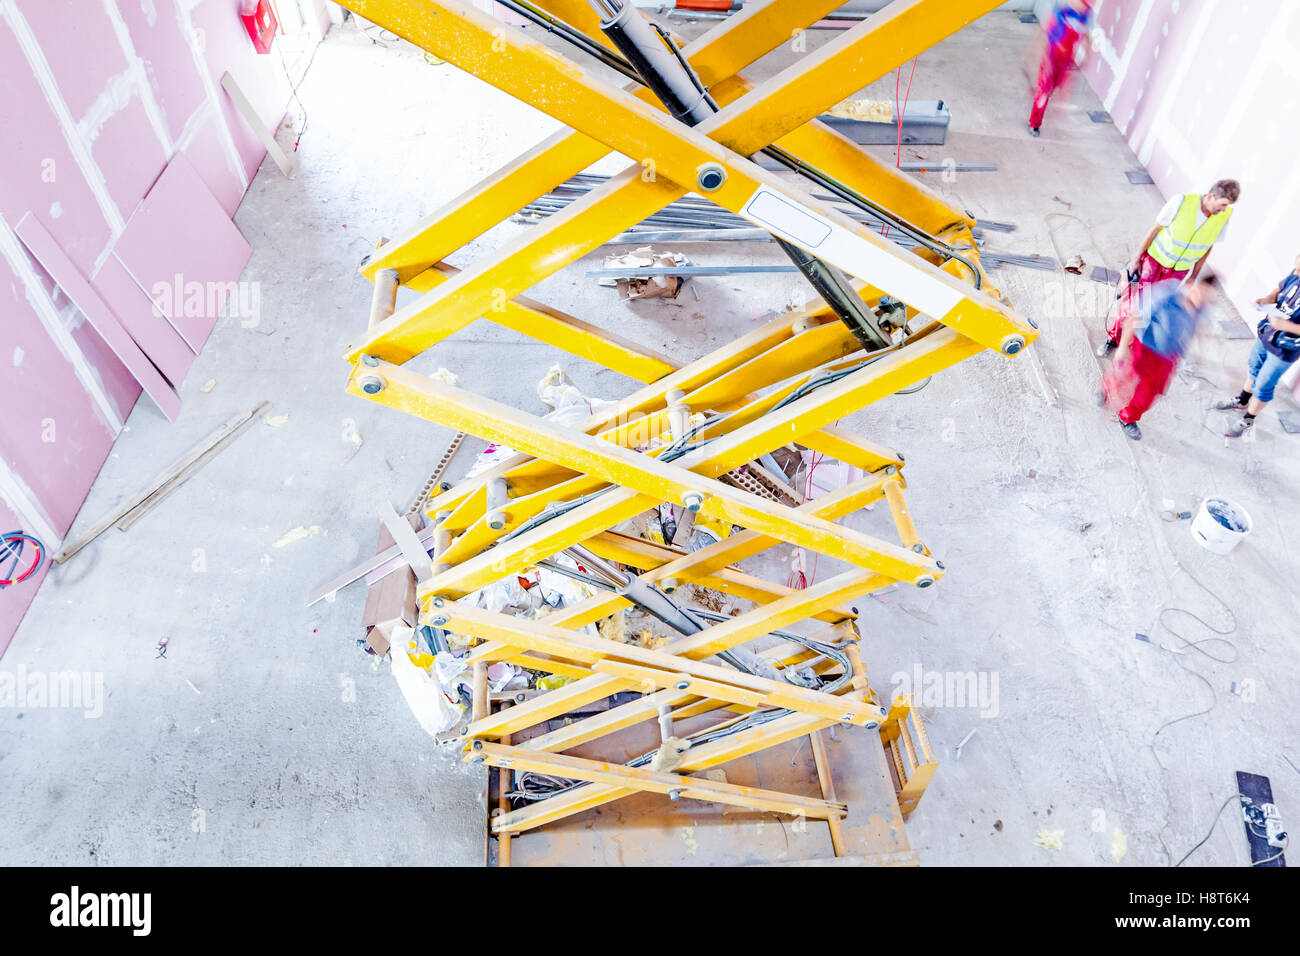 Scissor lift platform with stretched hydraulic system at maximum height range. Stock Photo